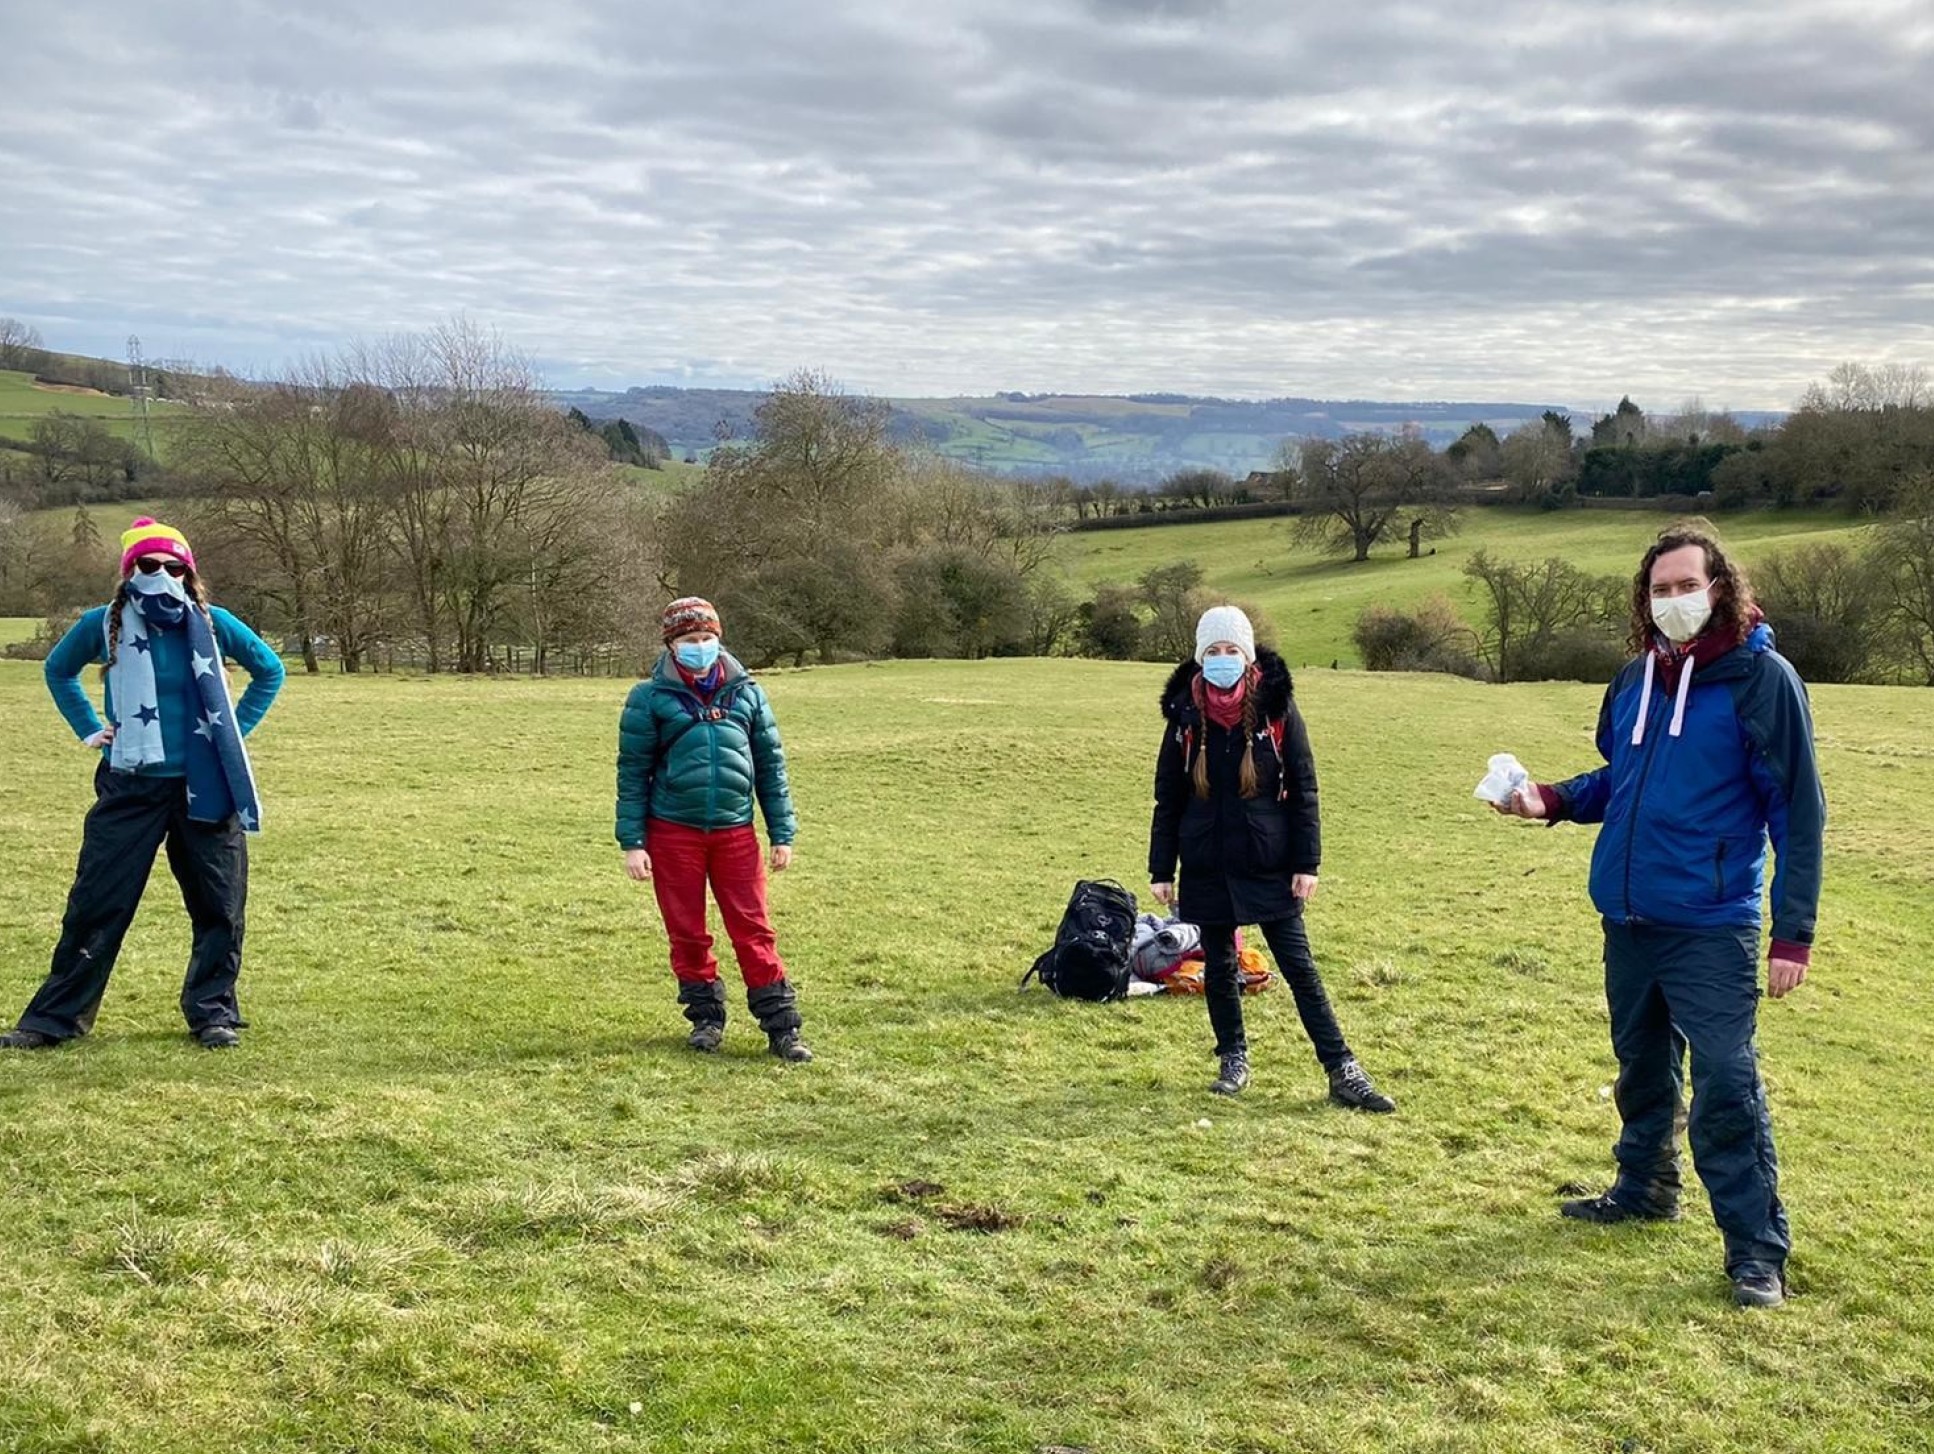 UKFAll scientists on the hunt for the Winchcombe meteorite